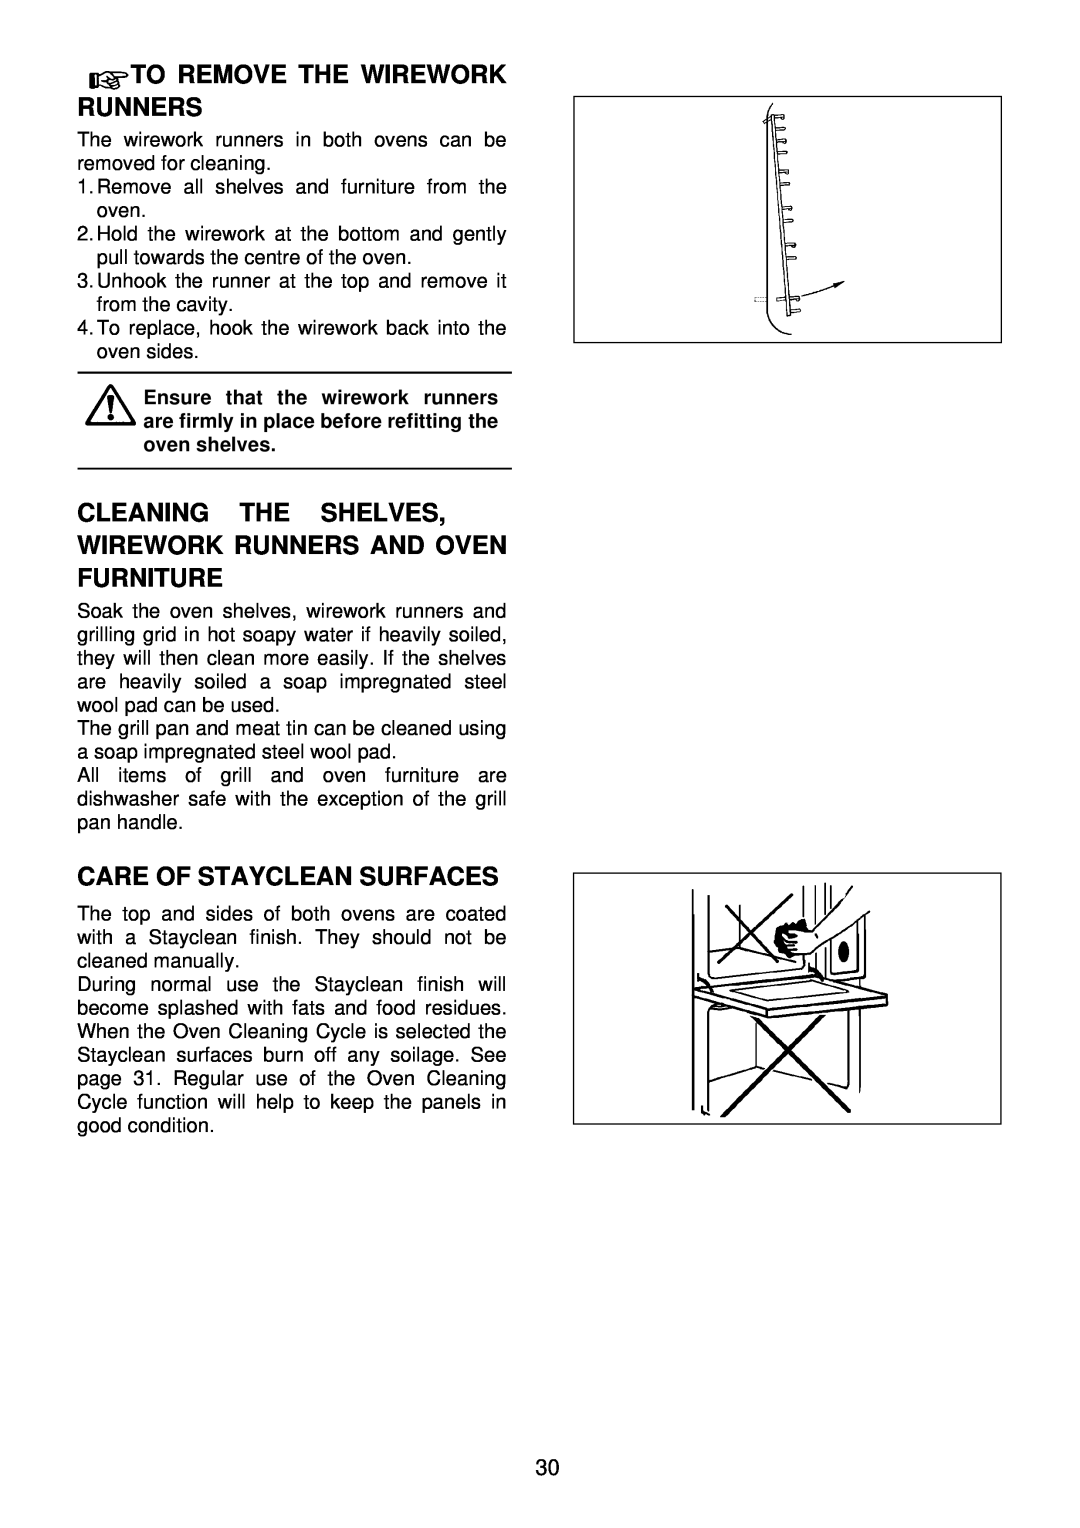 Electrolux EDB 876 manual To Remove The Wirework Runners, Cleaning The Shelves, Wirework Runners And Oven Furniture 